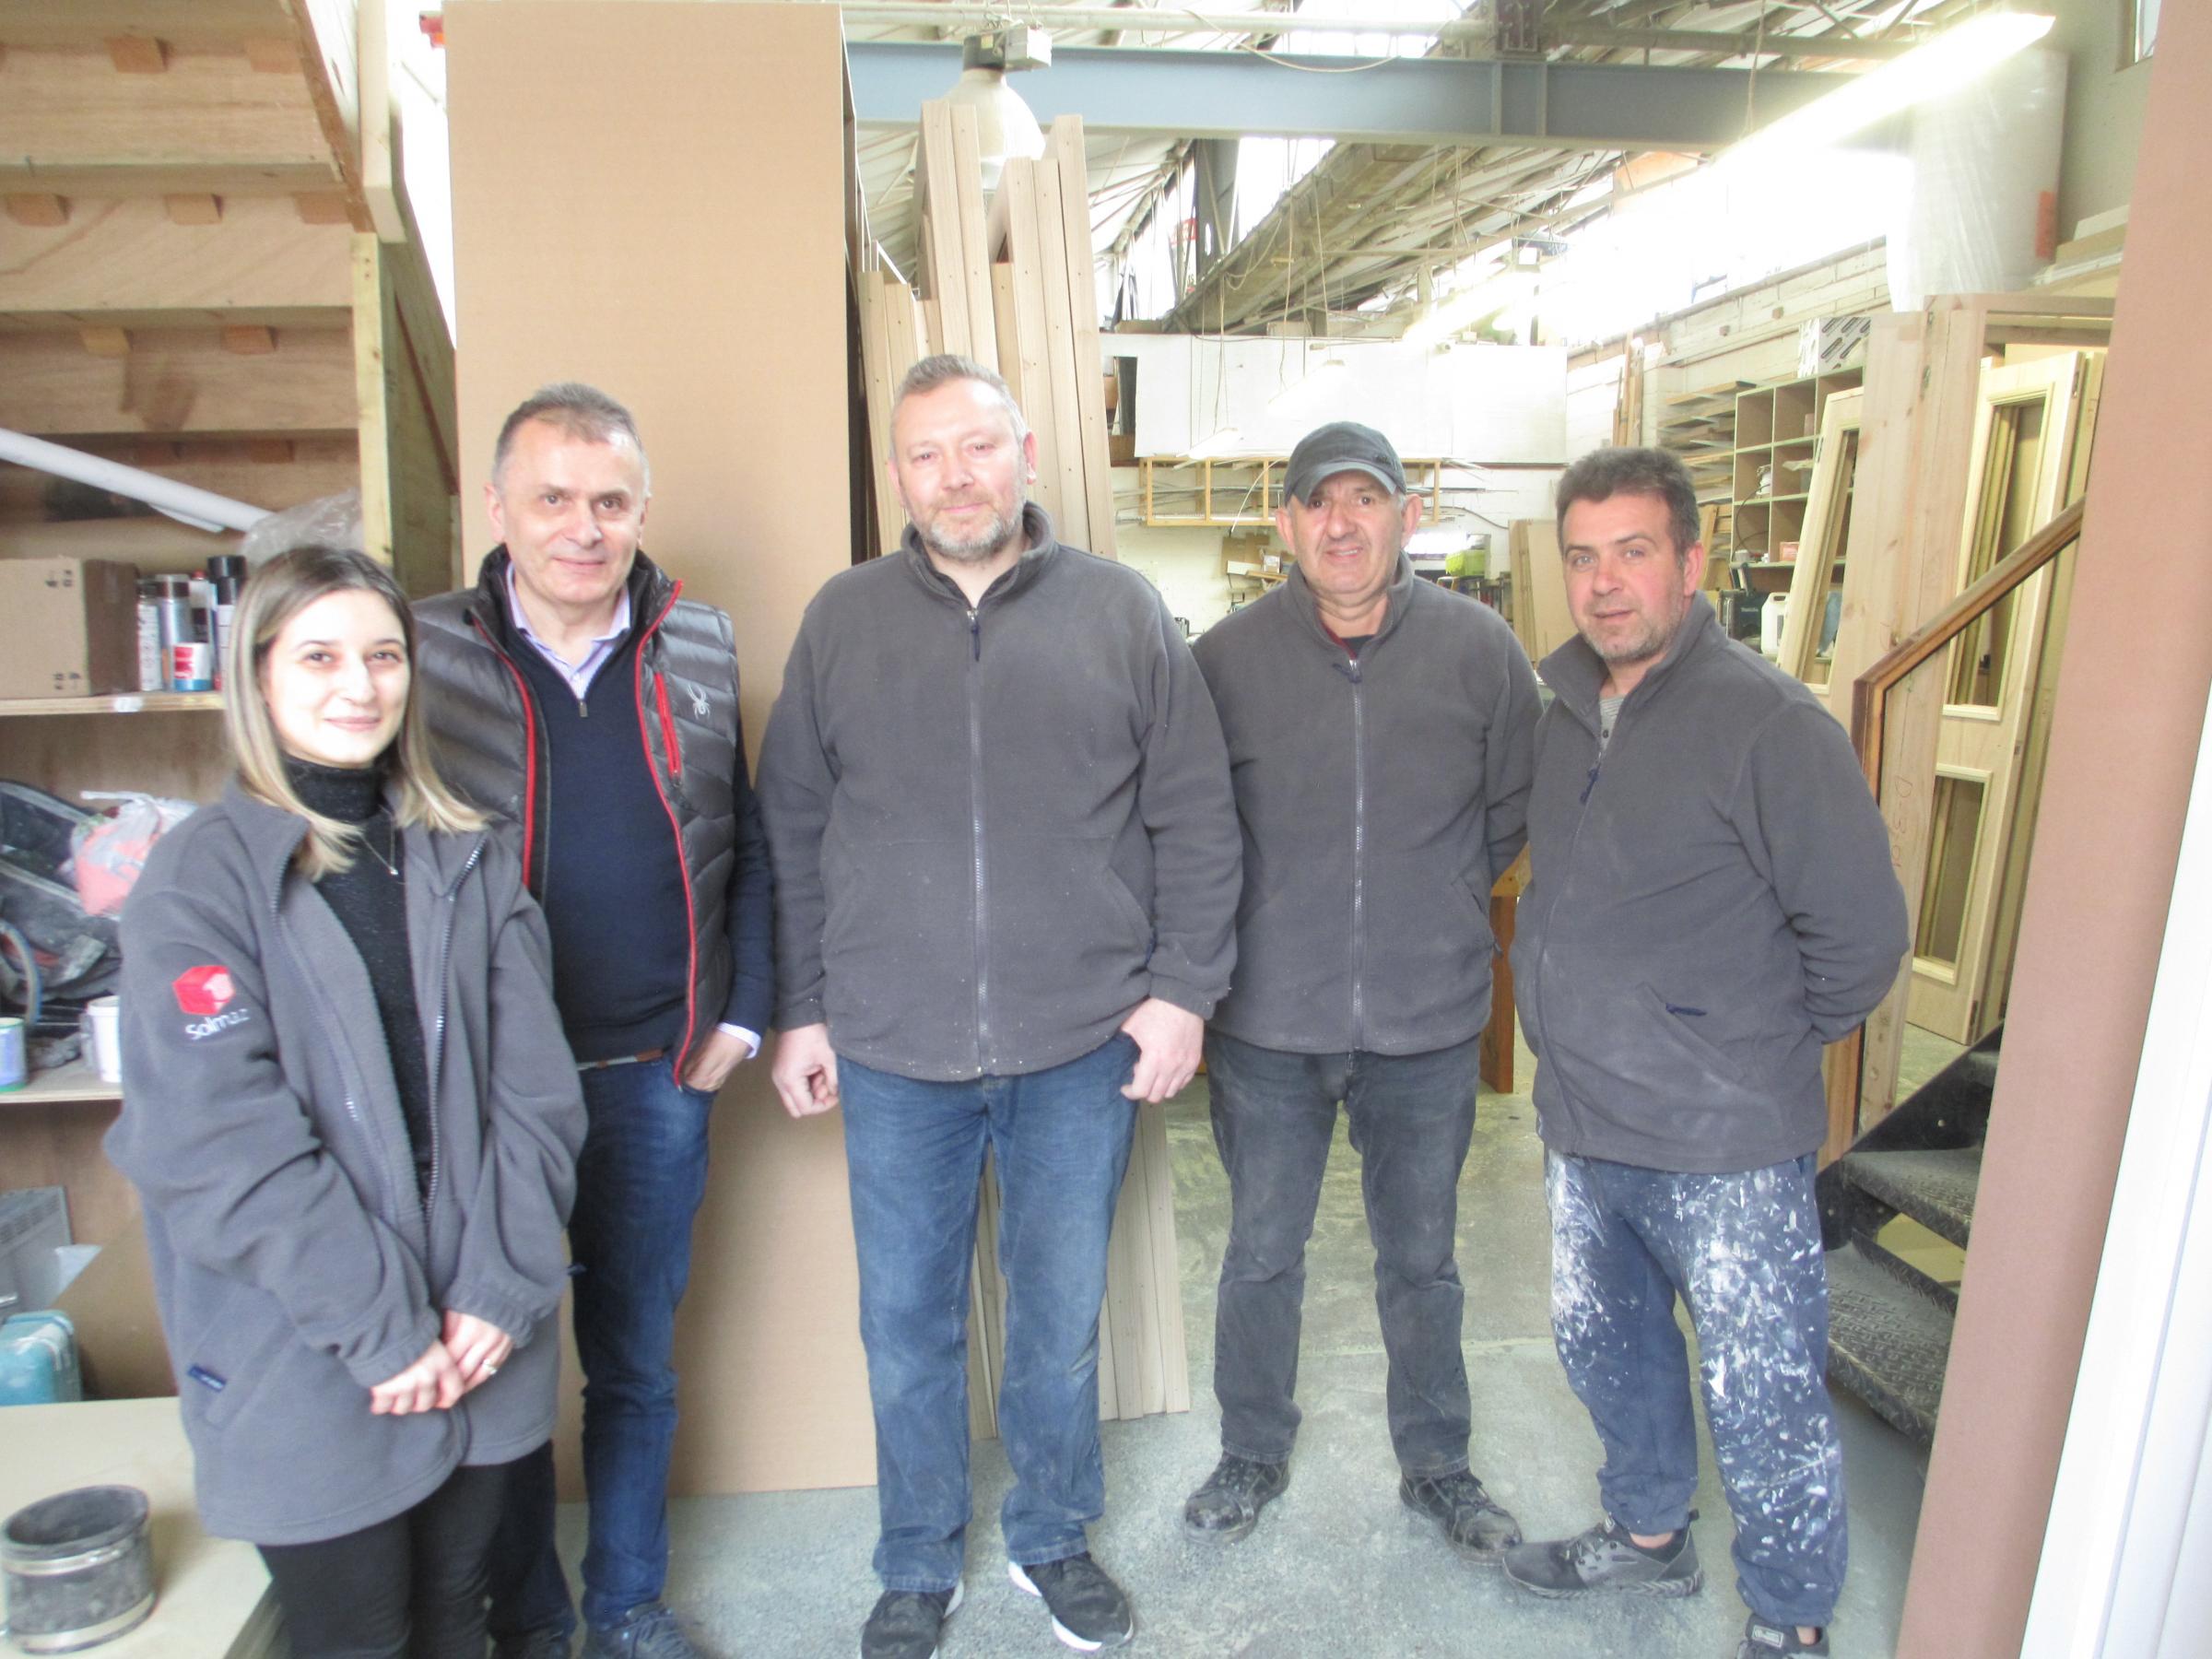 Faruk Tepeyurt (second from left) and staff At Solmaz, in ther Peacock Industrial Estate